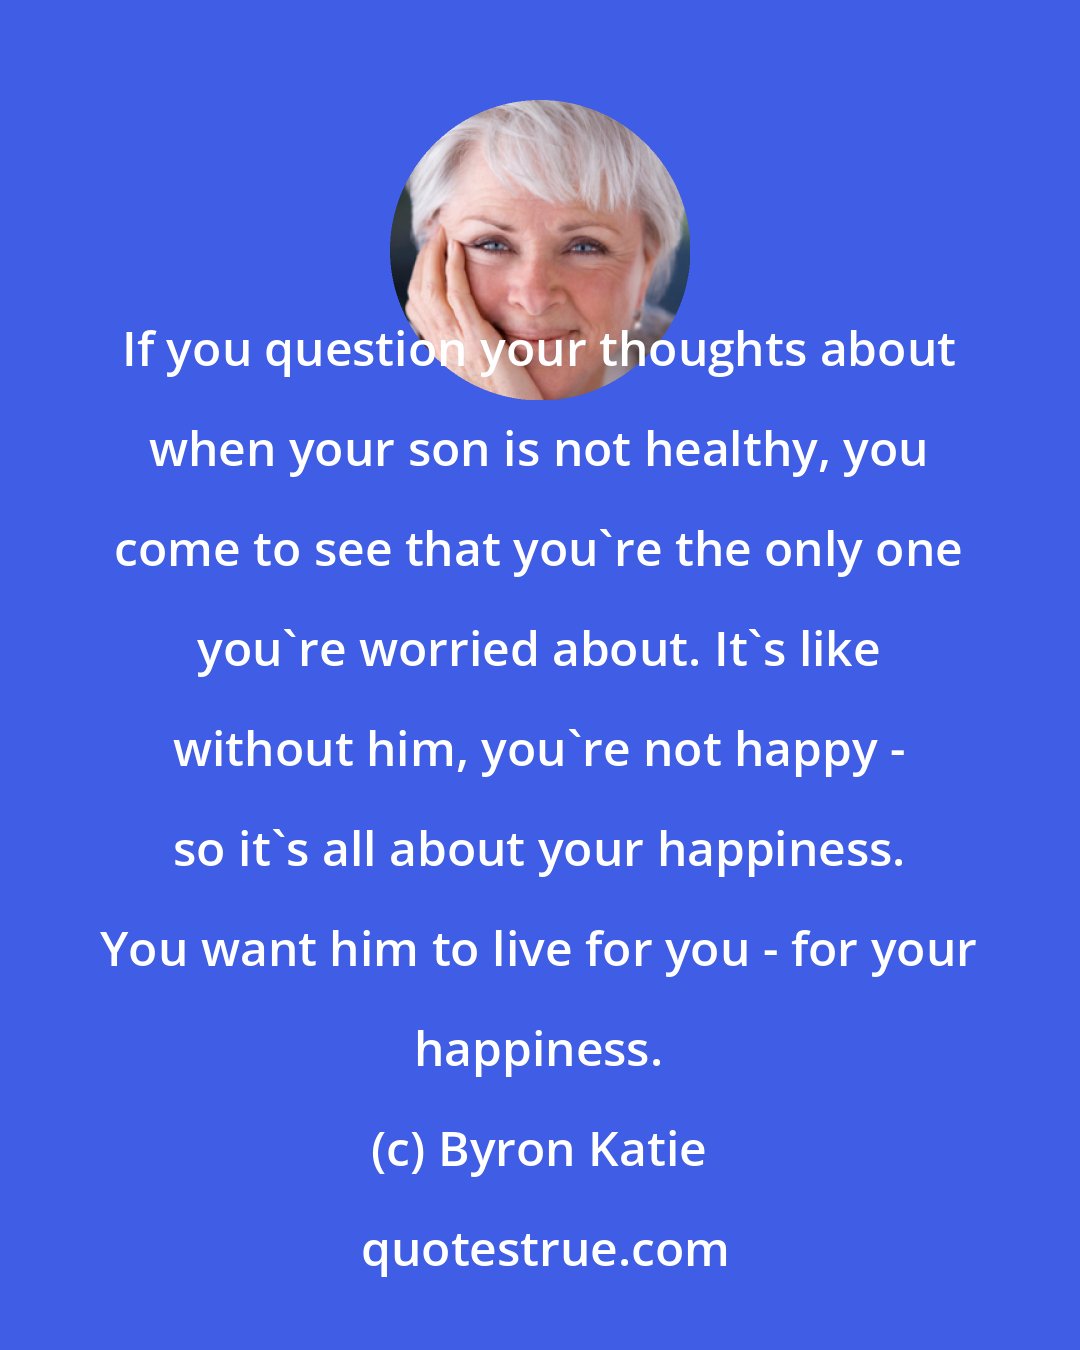 Byron Katie: If you question your thoughts about when your son is not healthy, you come to see that you're the only one you're worried about. It's like without him, you're not happy - so it's all about your happiness. You want him to live for you - for your happiness.